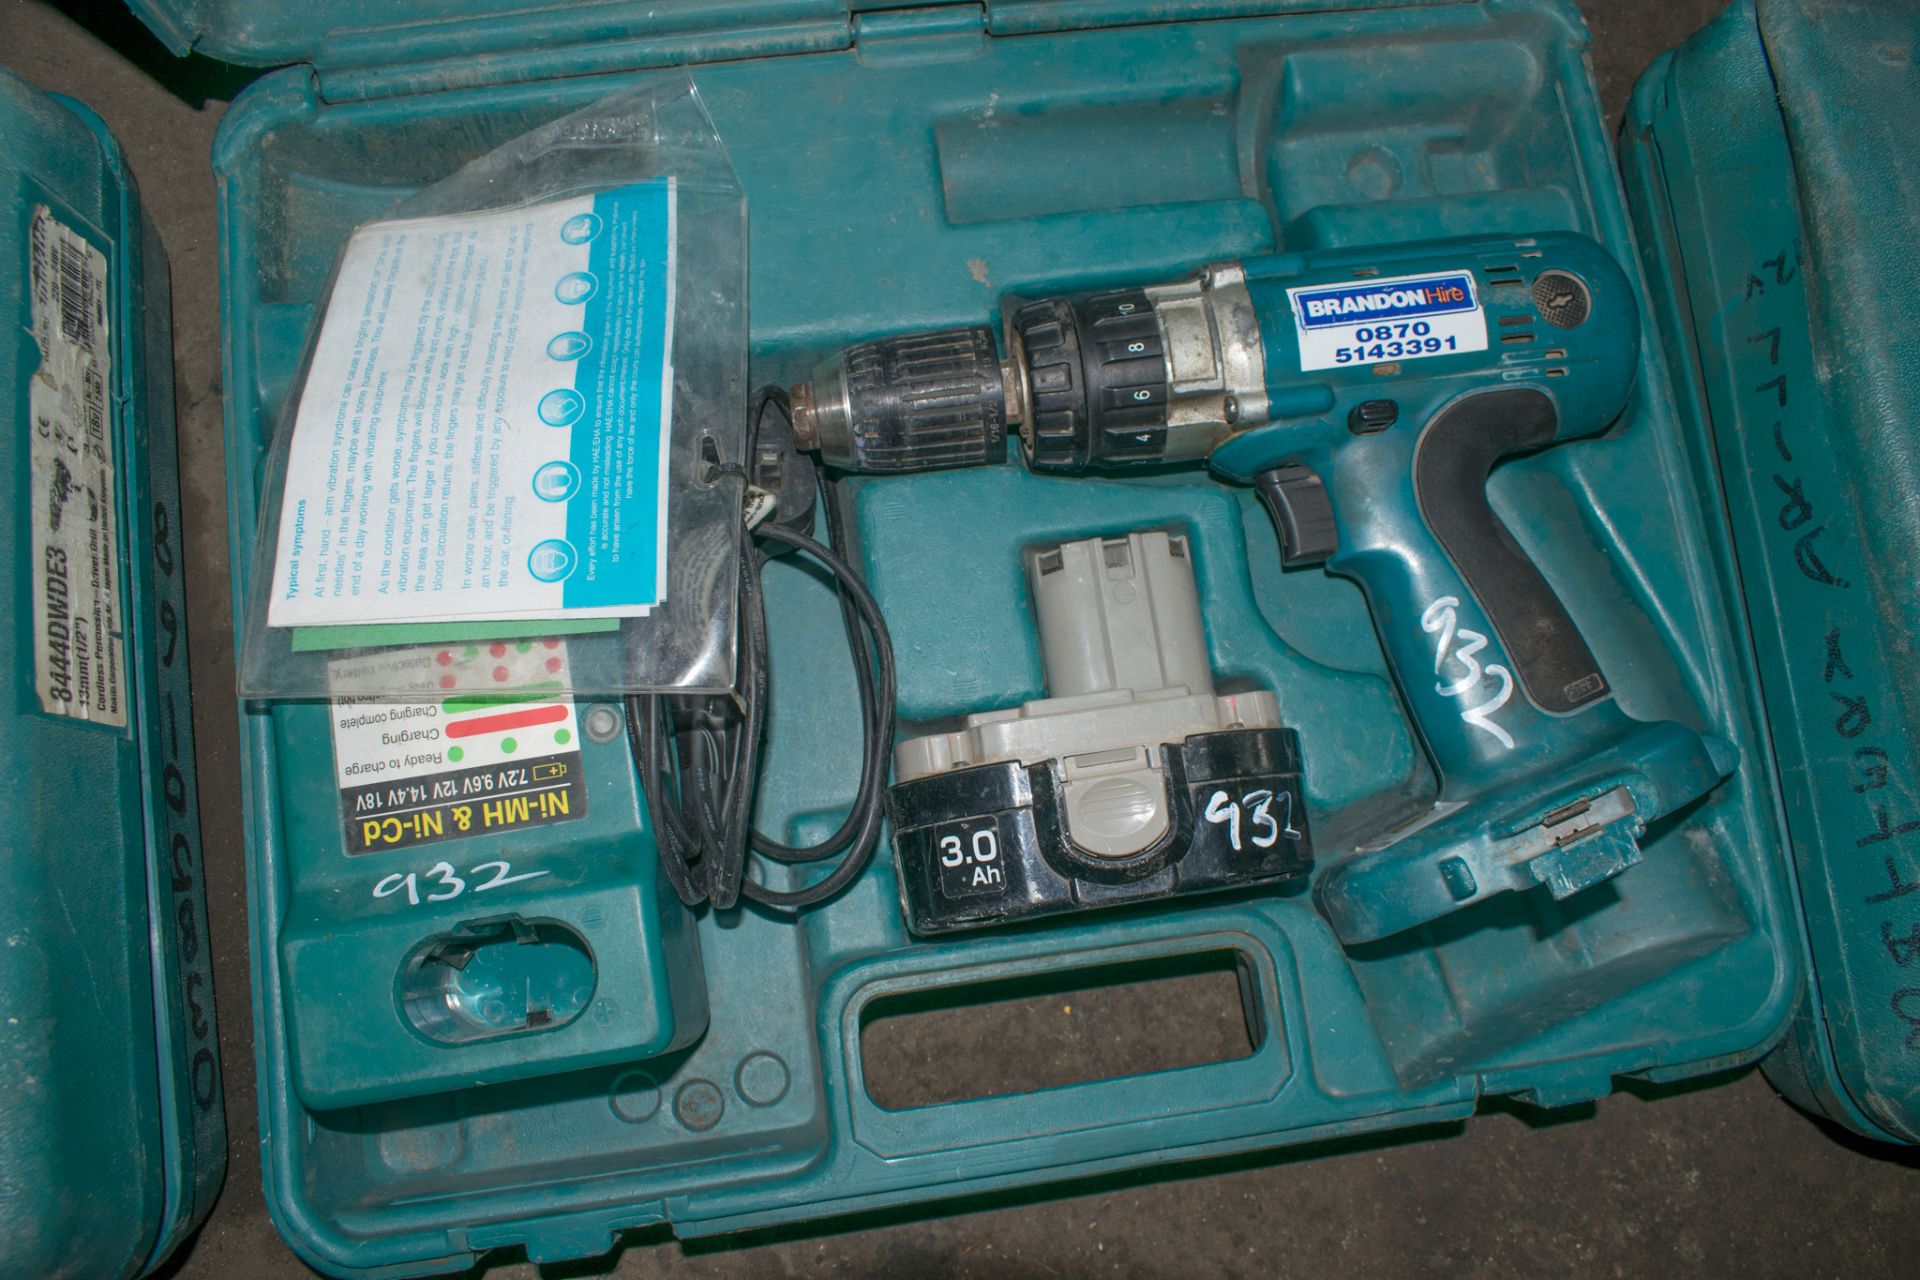 Makita cordless power drill c/w charger, battery & carry case